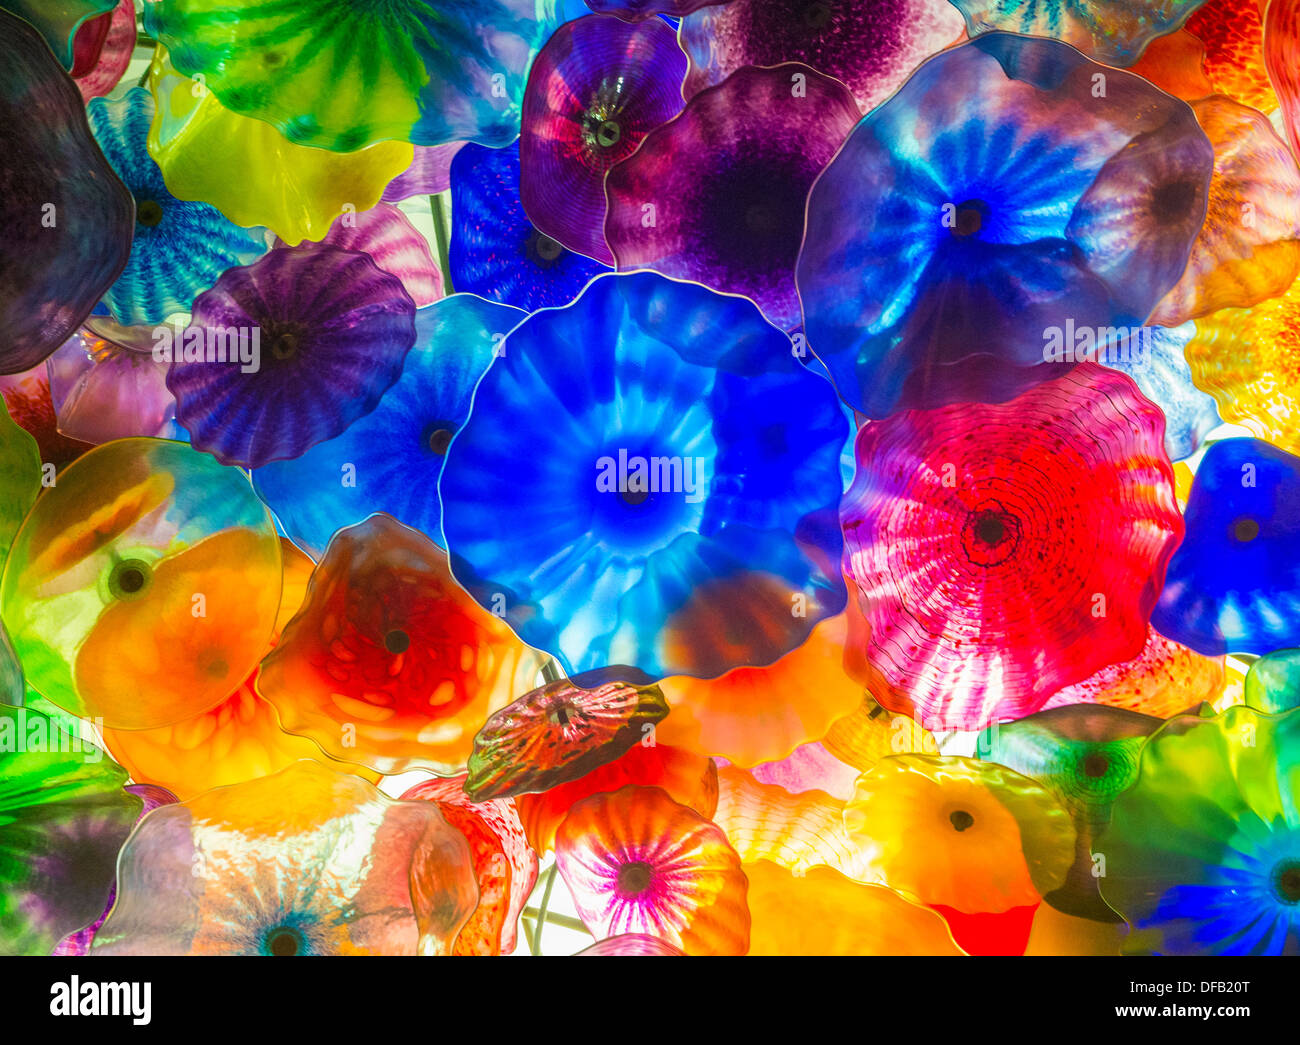 The Hand Blown Glass Flower Ceiling At The Bellagio Hotel In Las